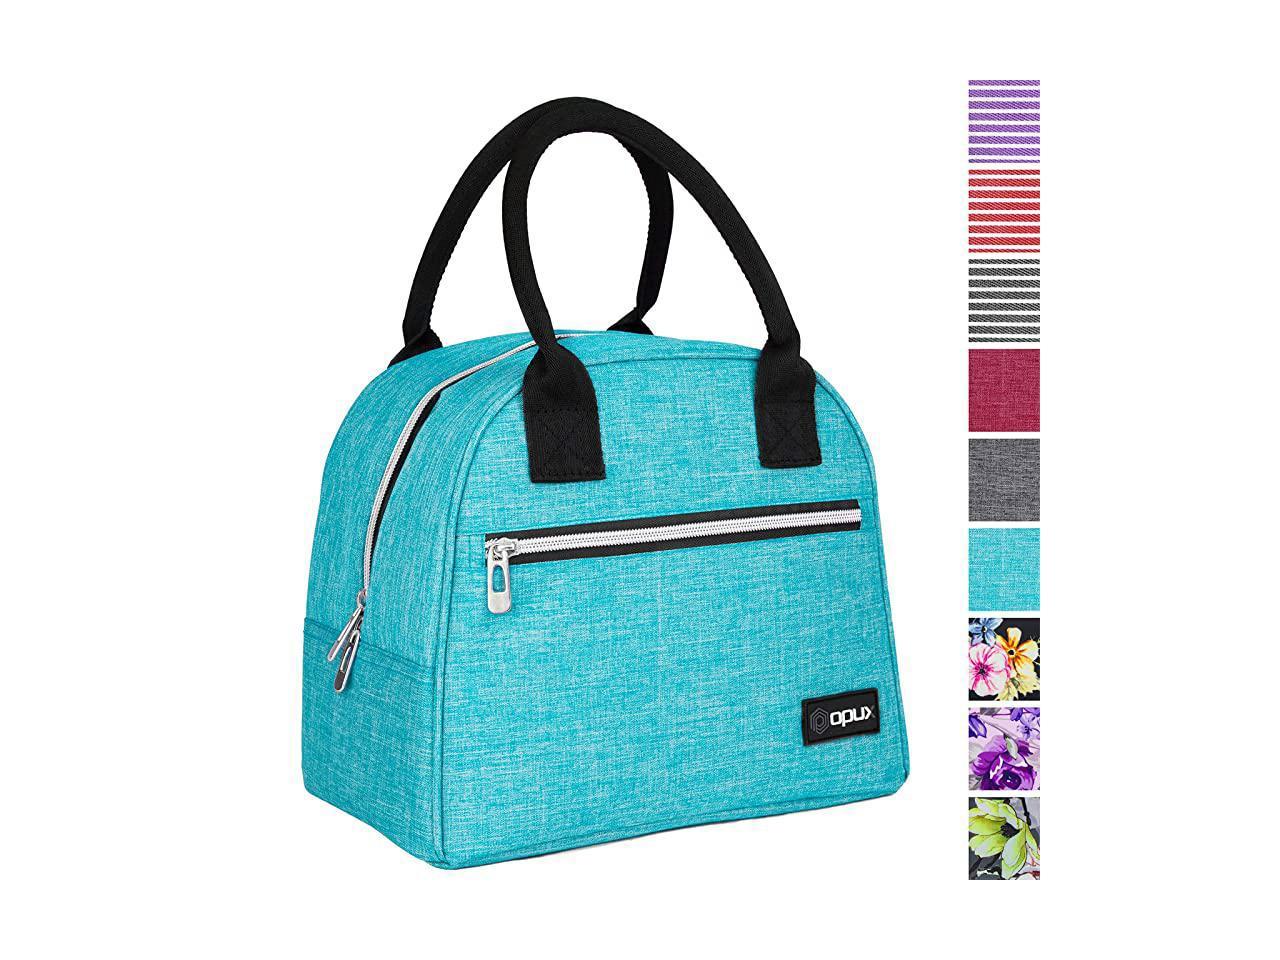 Lunch Box for Women | Insulated Lunch Bag Tote for Girls Ladies Teens ...